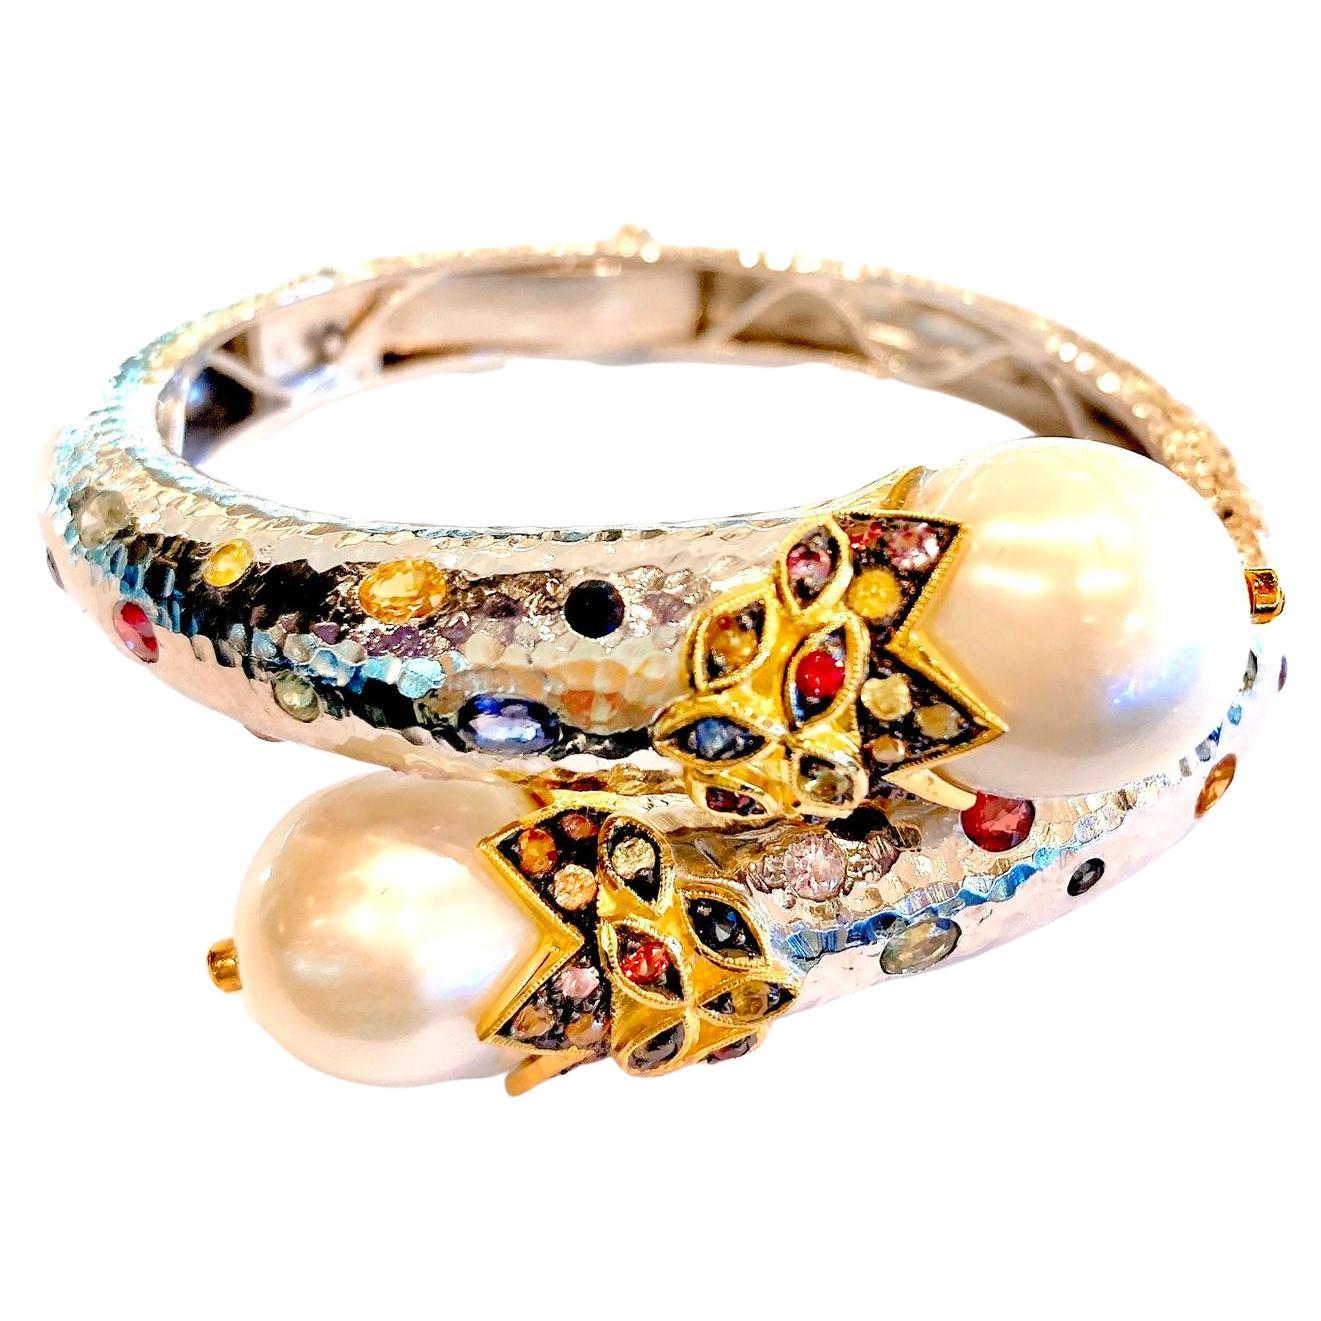 Bochic “Orient” Bangle set 22K Gold & Silver with Pearls & Sapphires 
White South Sea pearls white color, silver tone 
Natural Multi Color Sapphire from Sri Lankan  - 3 carats 
Sapphire colors, Red, Orange, Blue, Yellow and Pink
Set in 22K Gold and